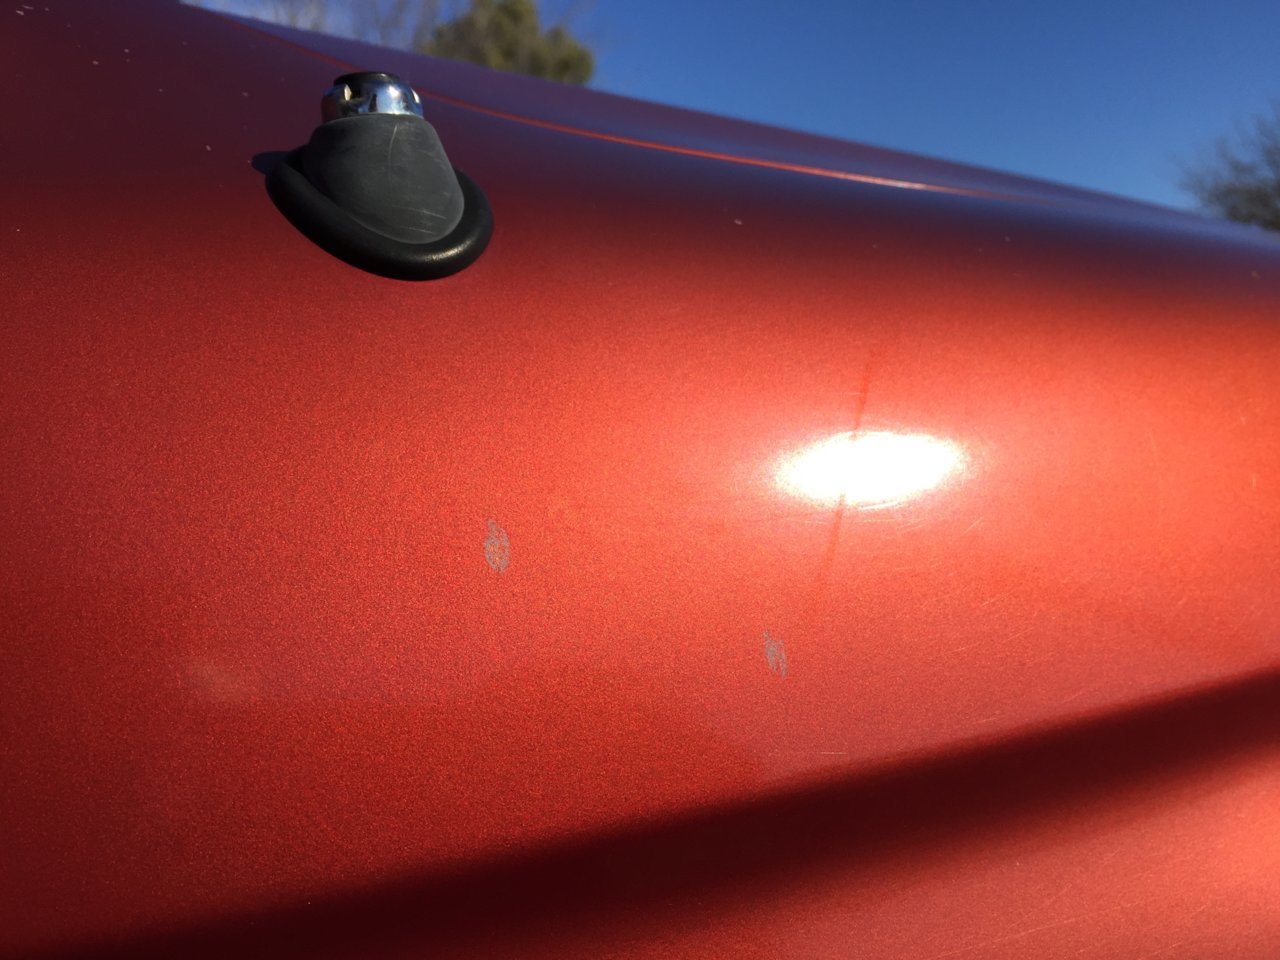 Planning on wrapping my 97 Del Sol, but the paint and clear coat is not in  good condition at all. Clearcoat peeling everywhere like shown in the  picture, no deep scratches but